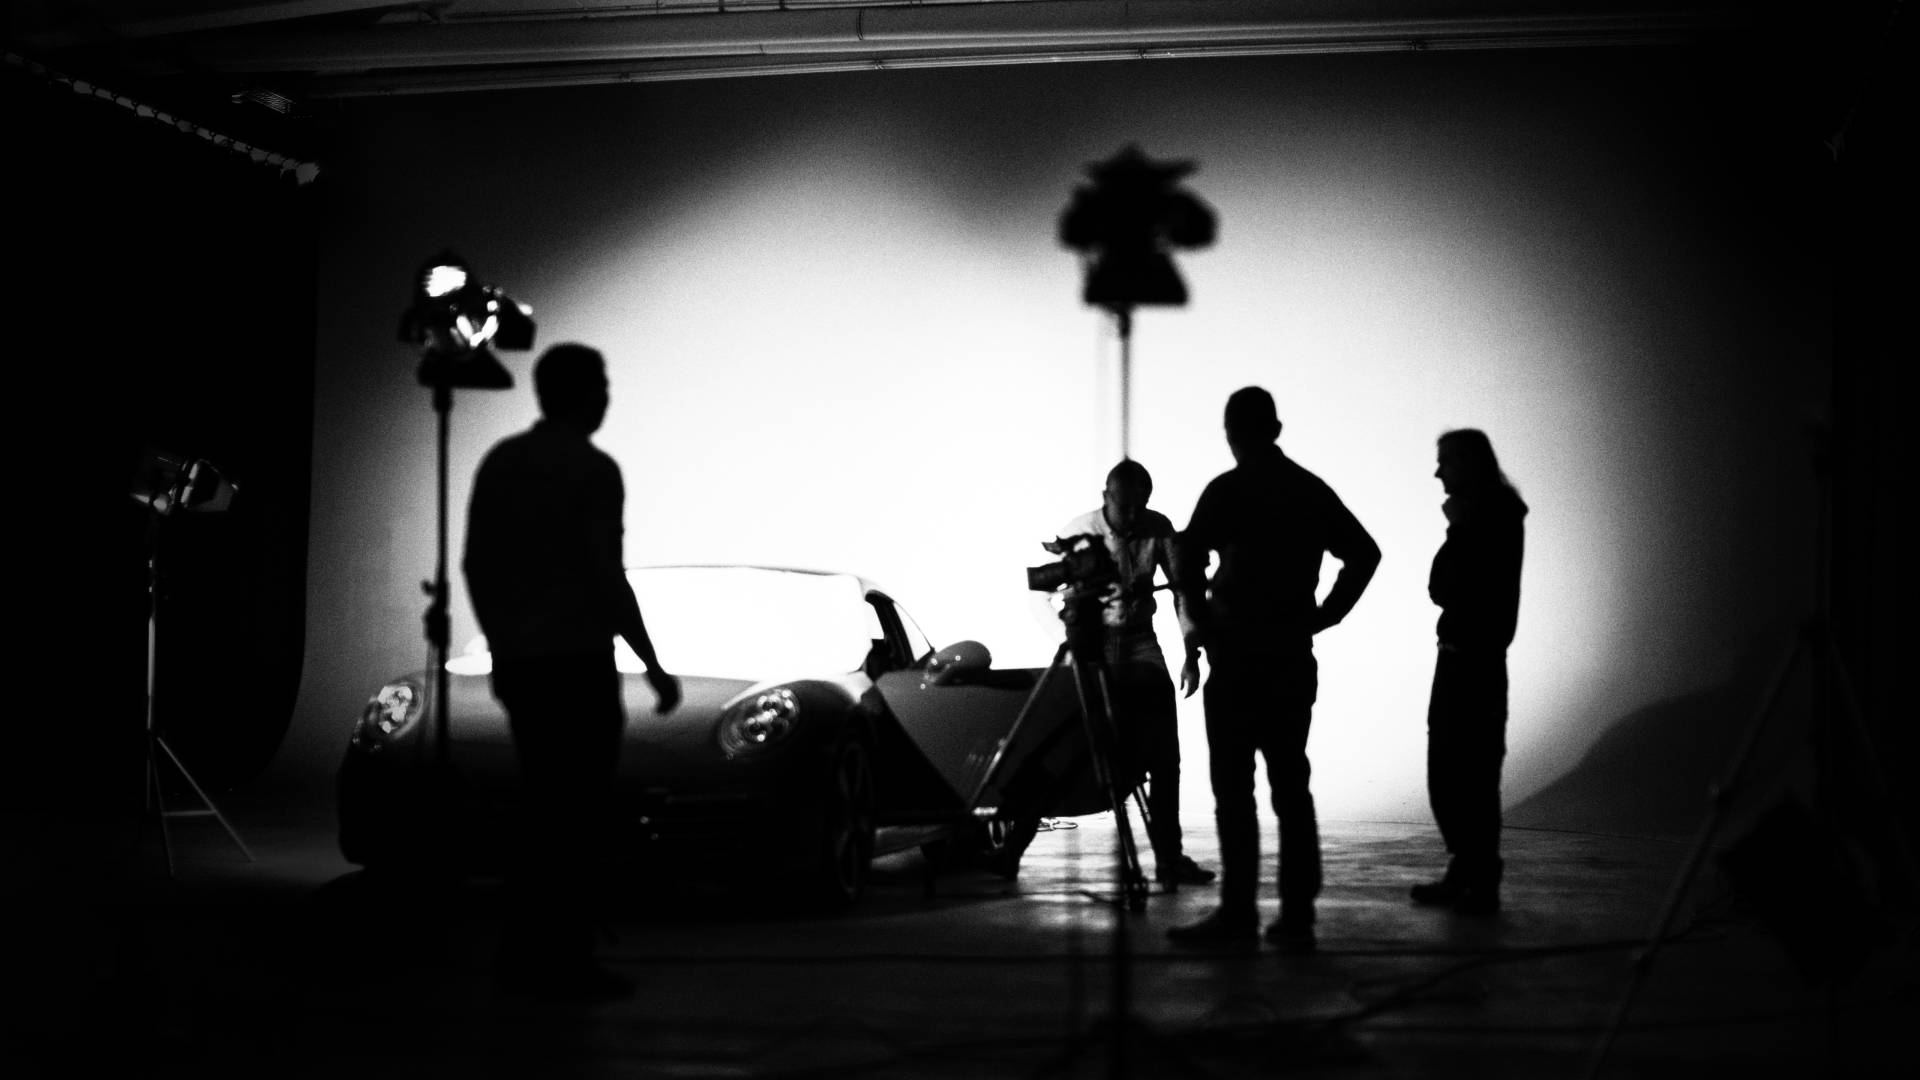 Impressions from shooting with Porsche and the camera crew